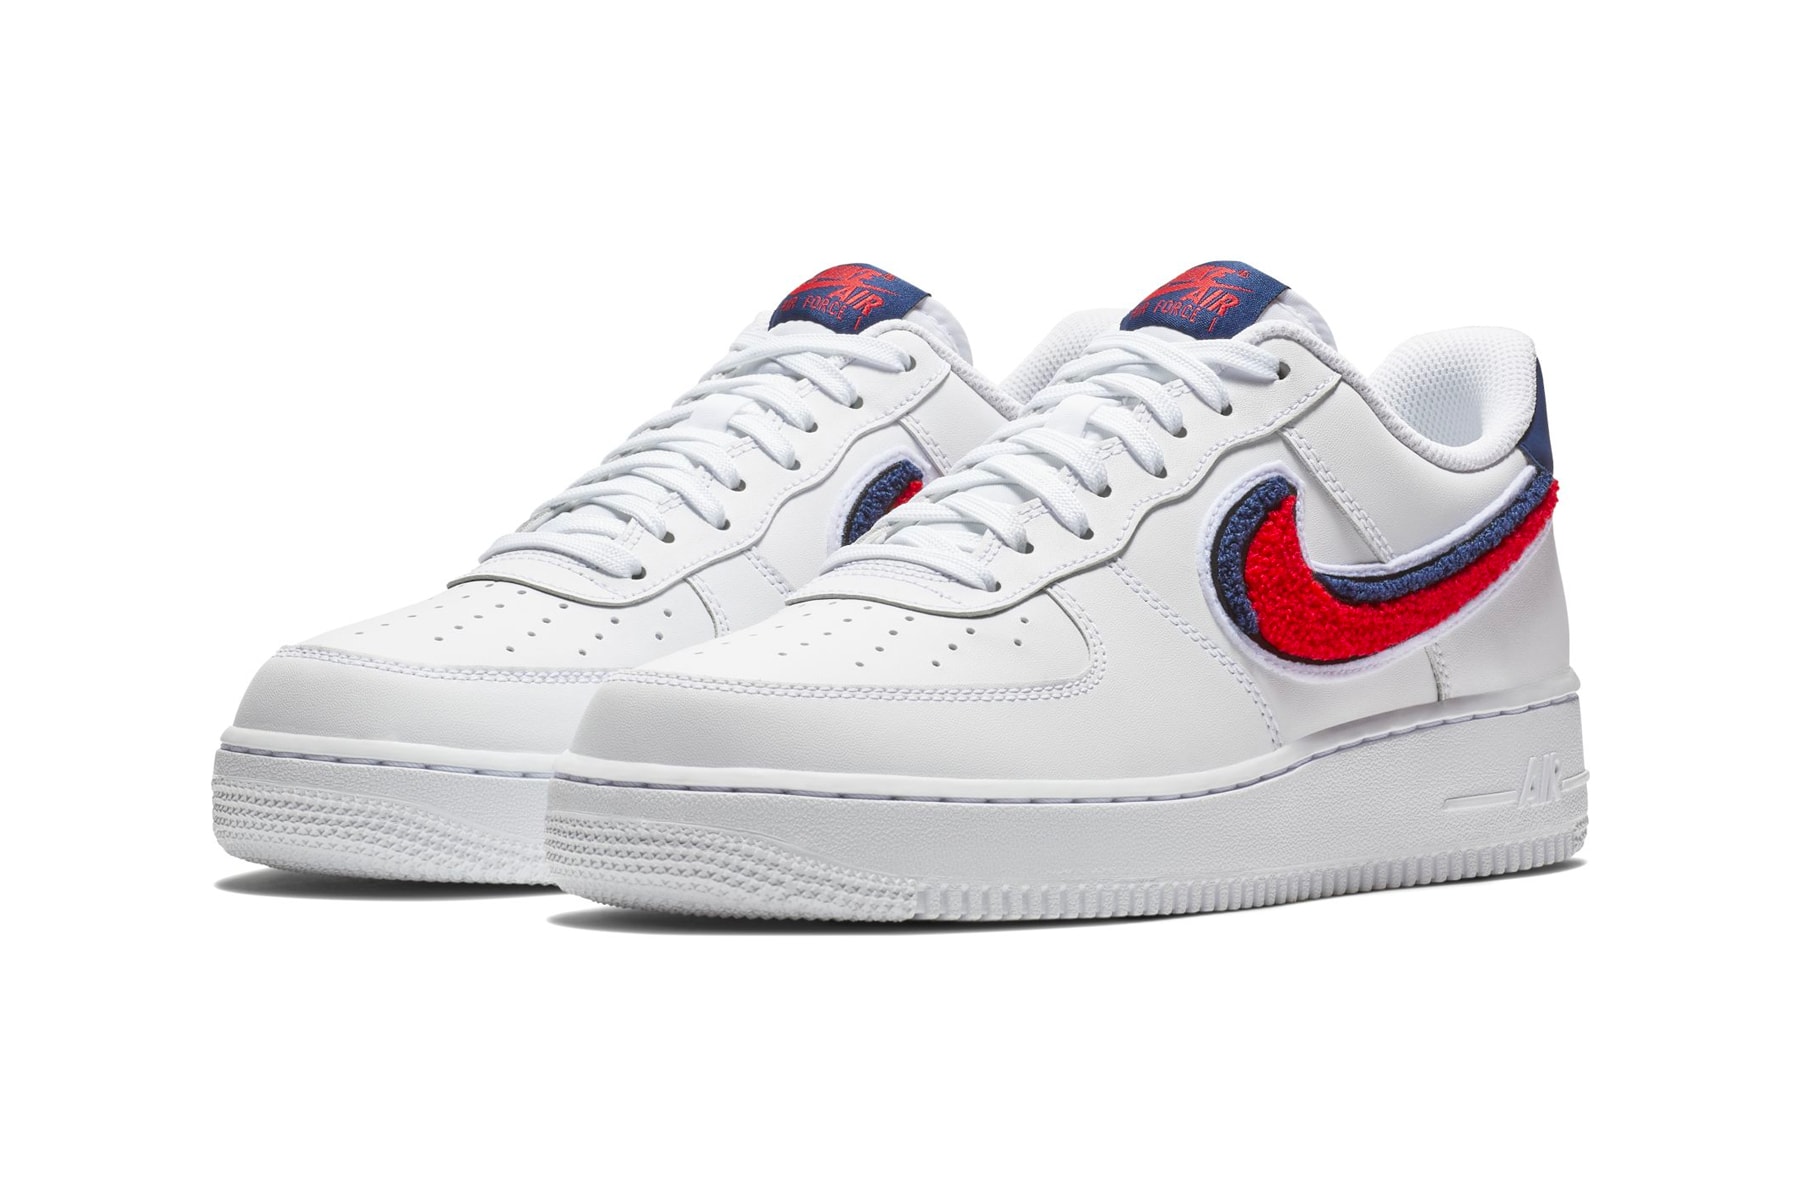 Nike Air Force 1 '07 LV8 Chenille Swoosh Release Date